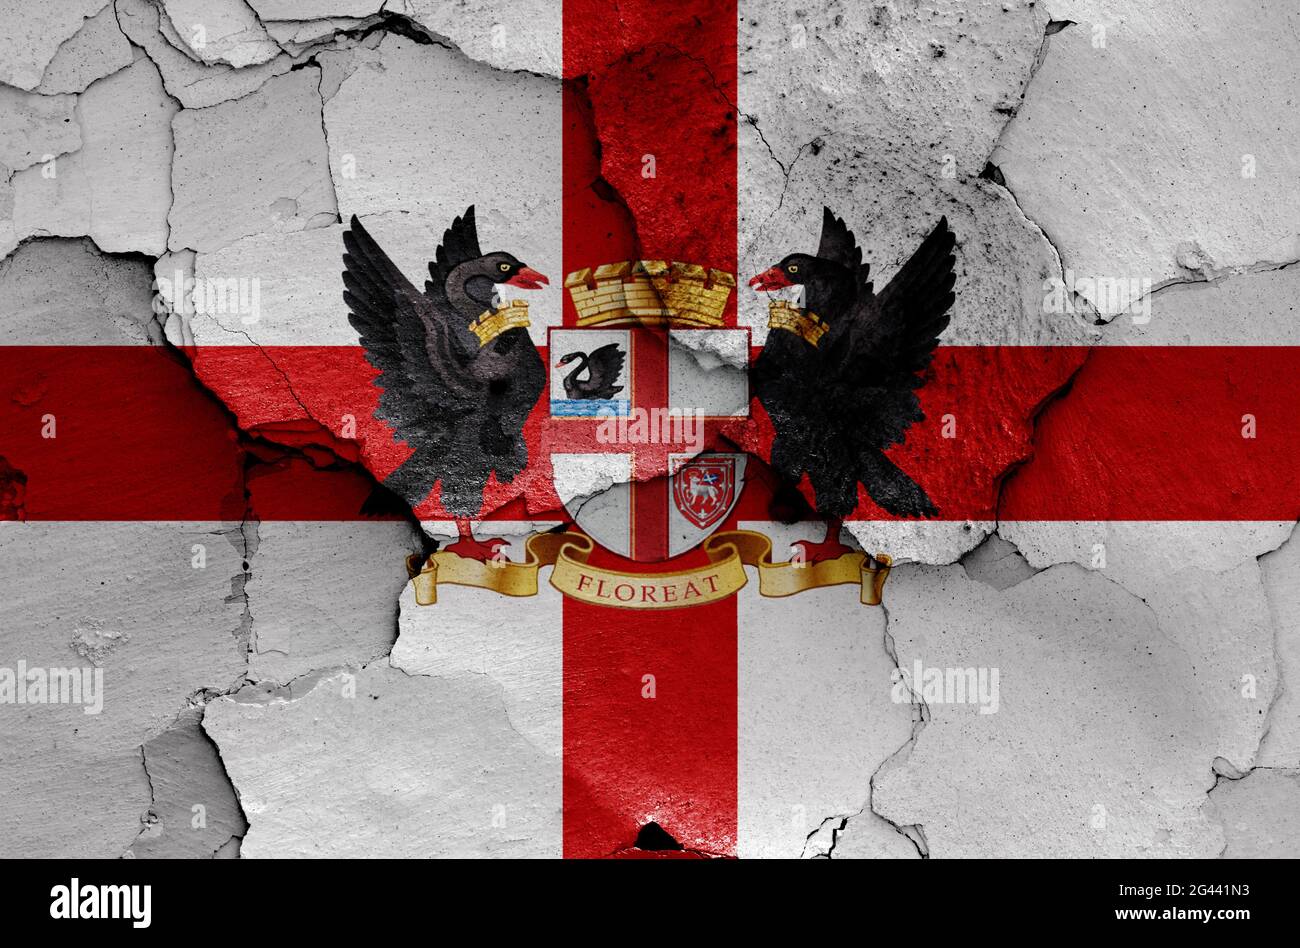 Flag of Perth painted on cracked wall Stock Photo